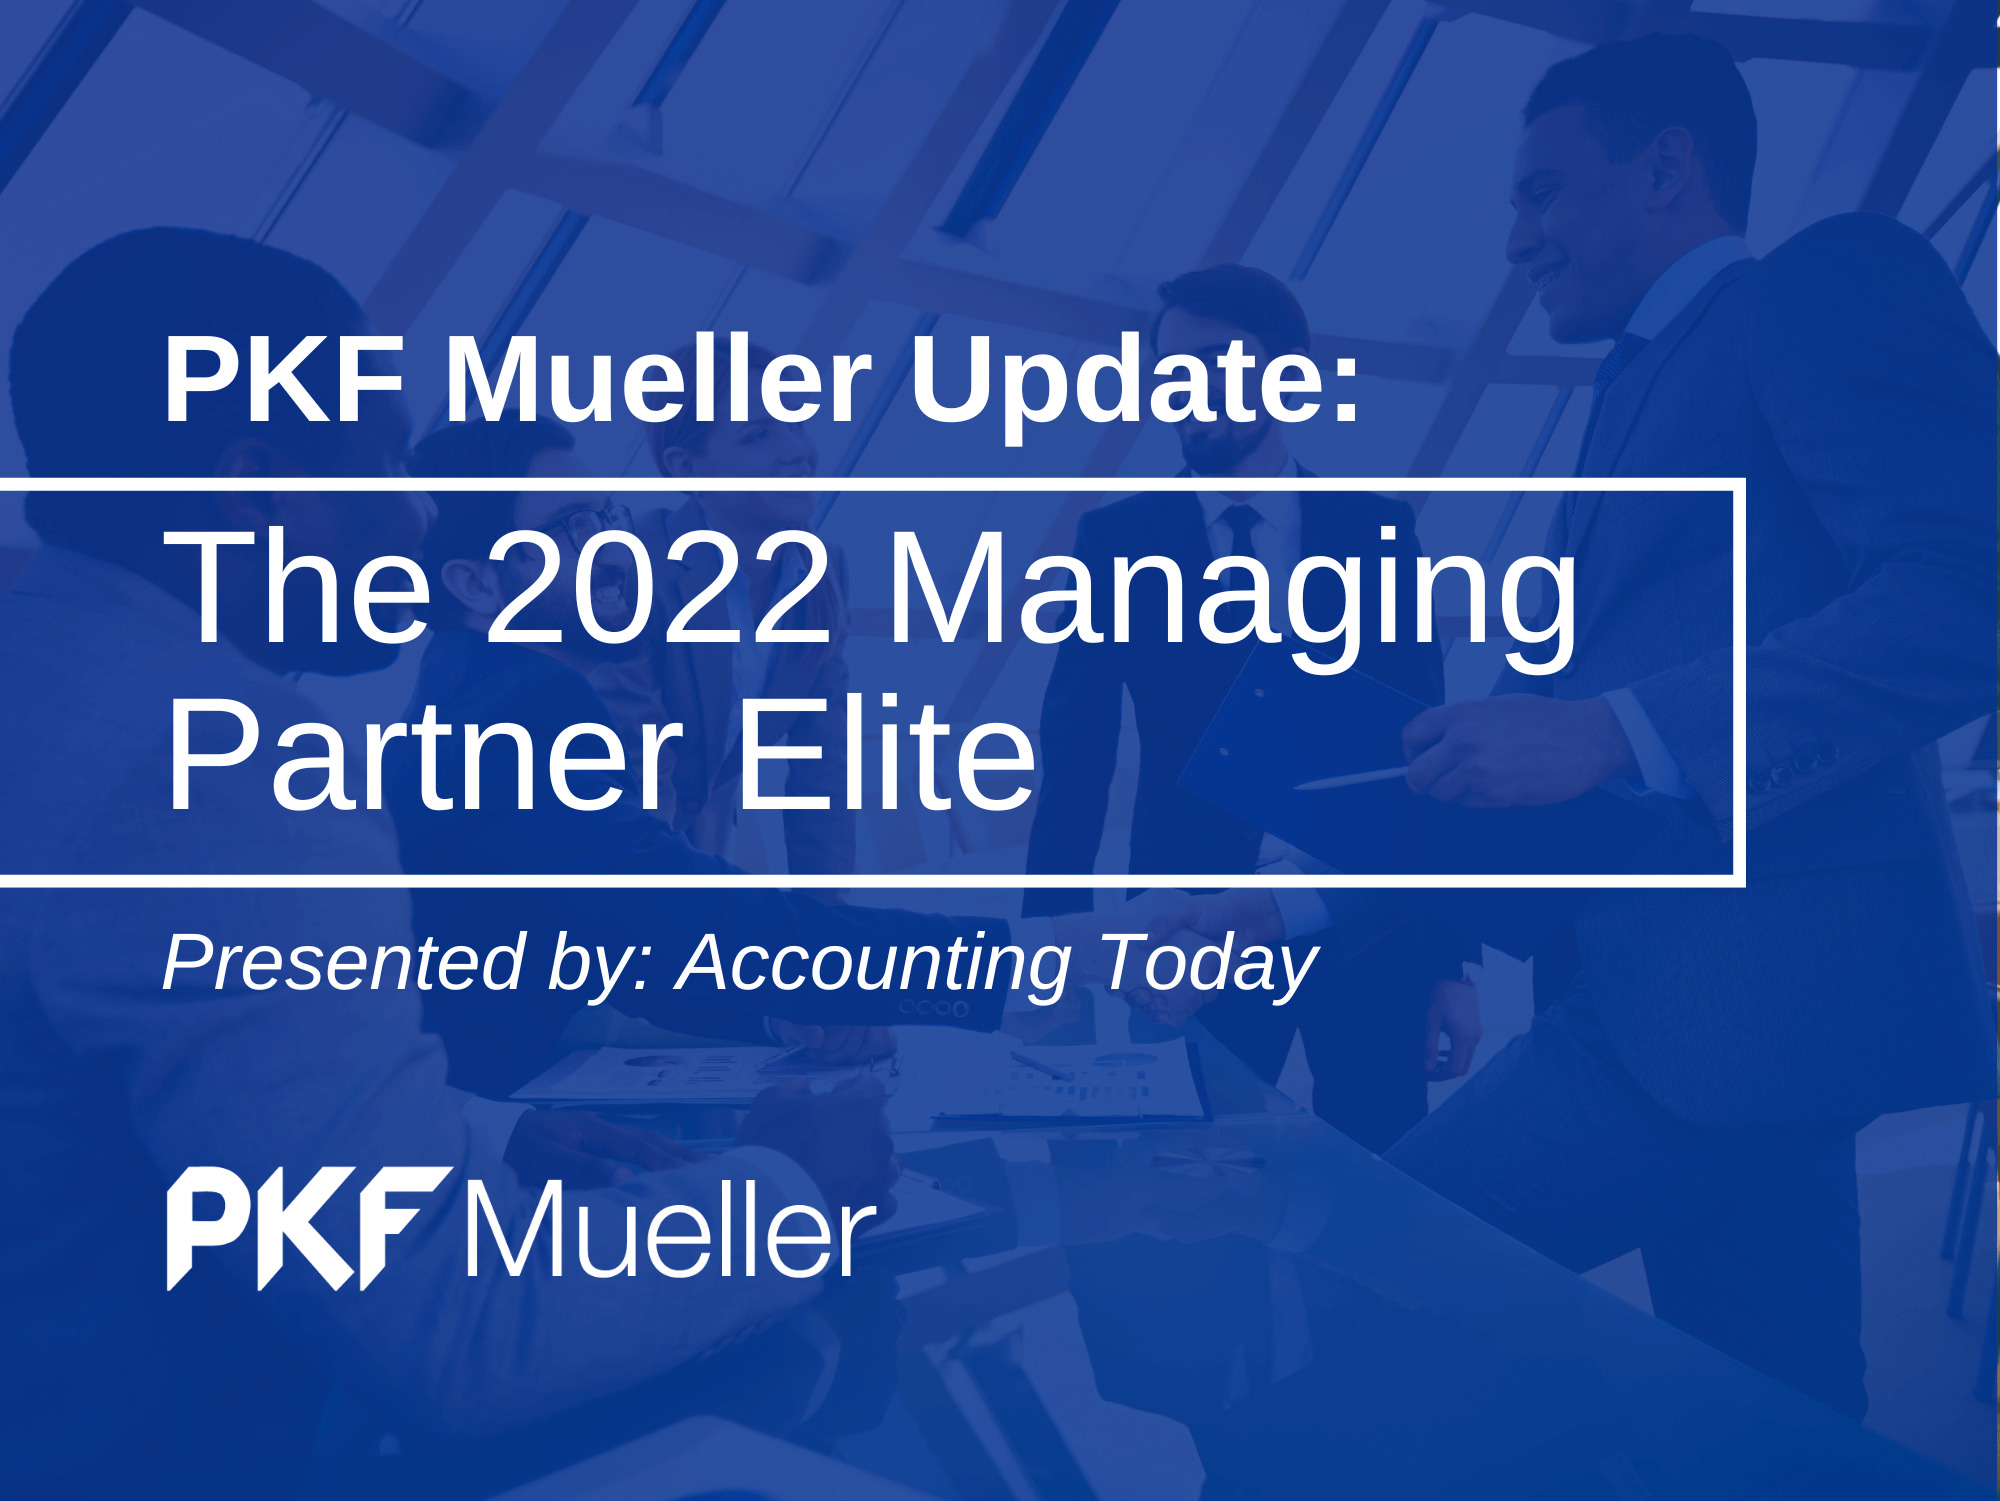 2022 Managing Partner Elite Presented by Accounting Today